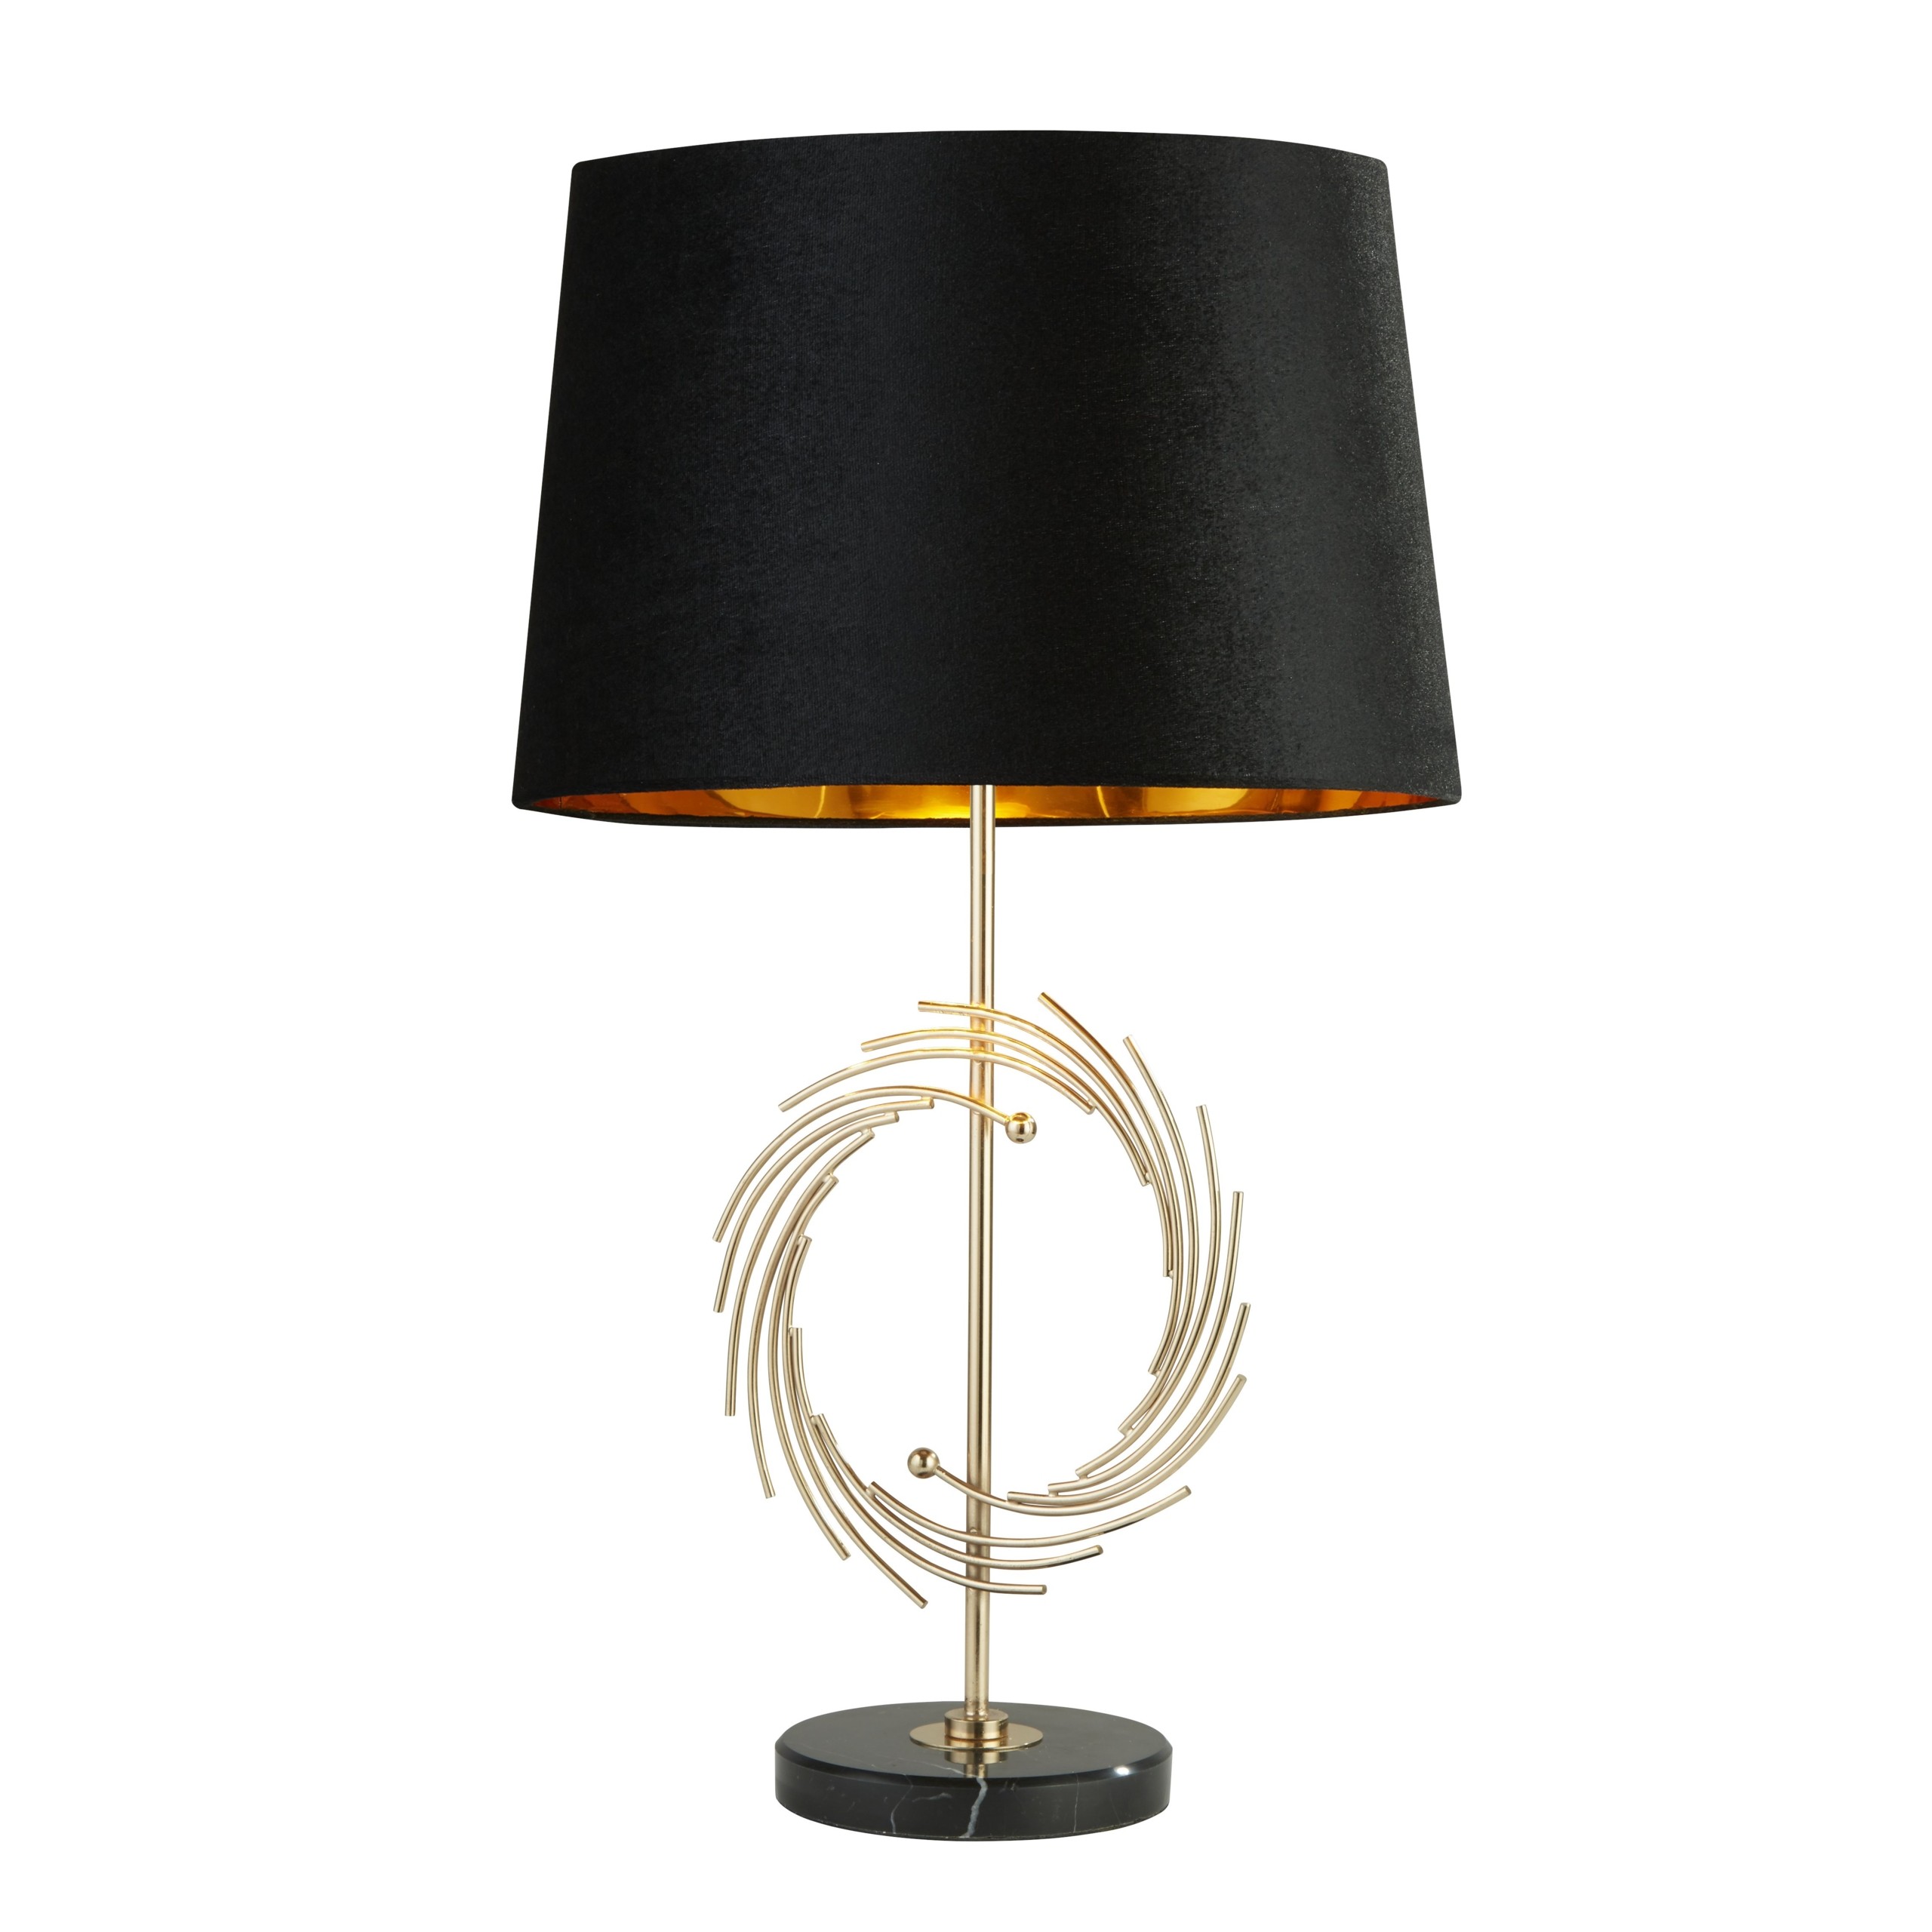 Searchlight 5310go fringe roman table lamp with marble